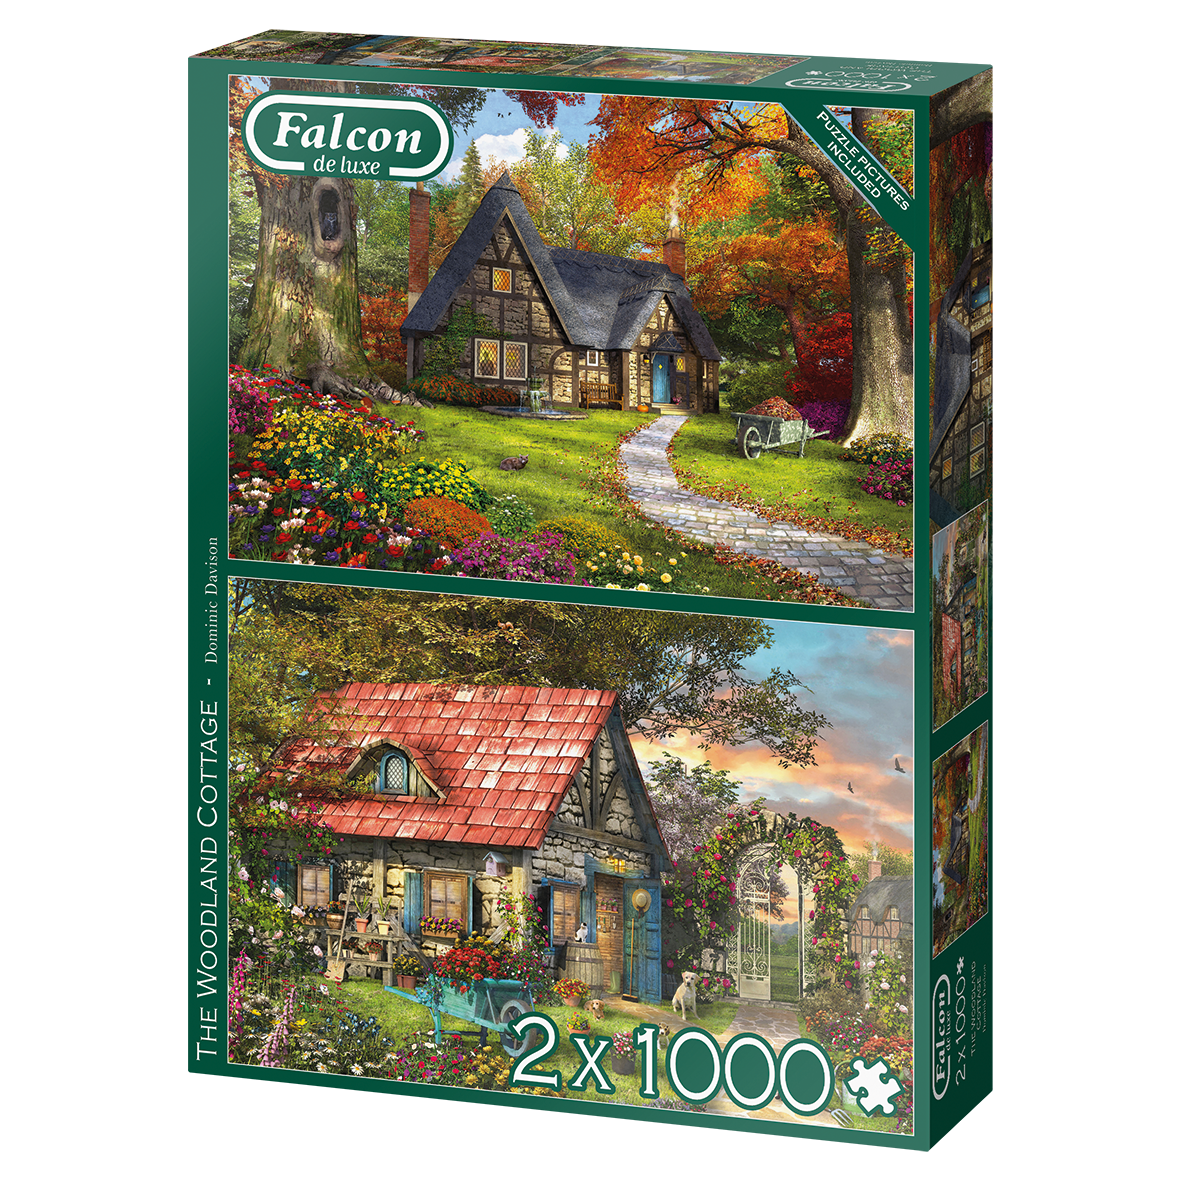 Falcon - The Woodland Cottage (2x1000 pieces) - product image - Jumboplay.com